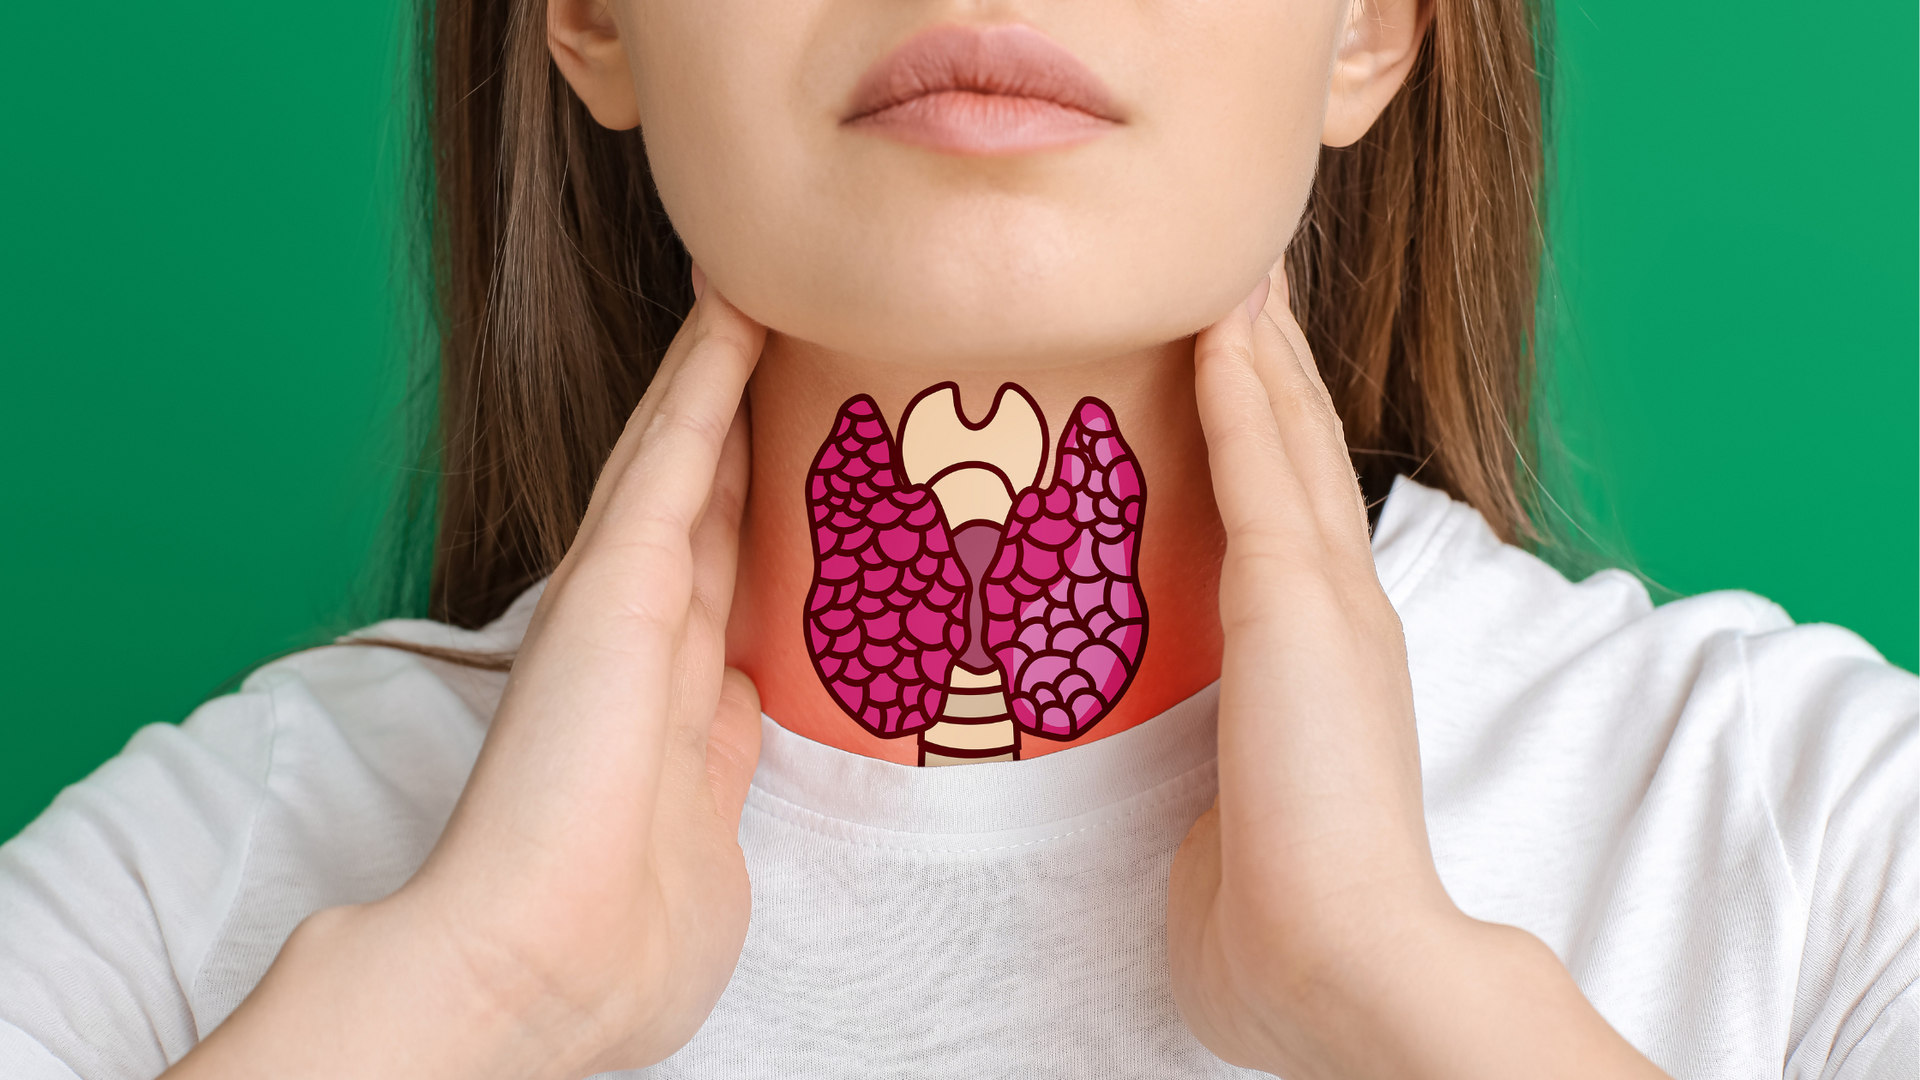 A woman holding her neck with an image of a thyroid over the front of the neck.